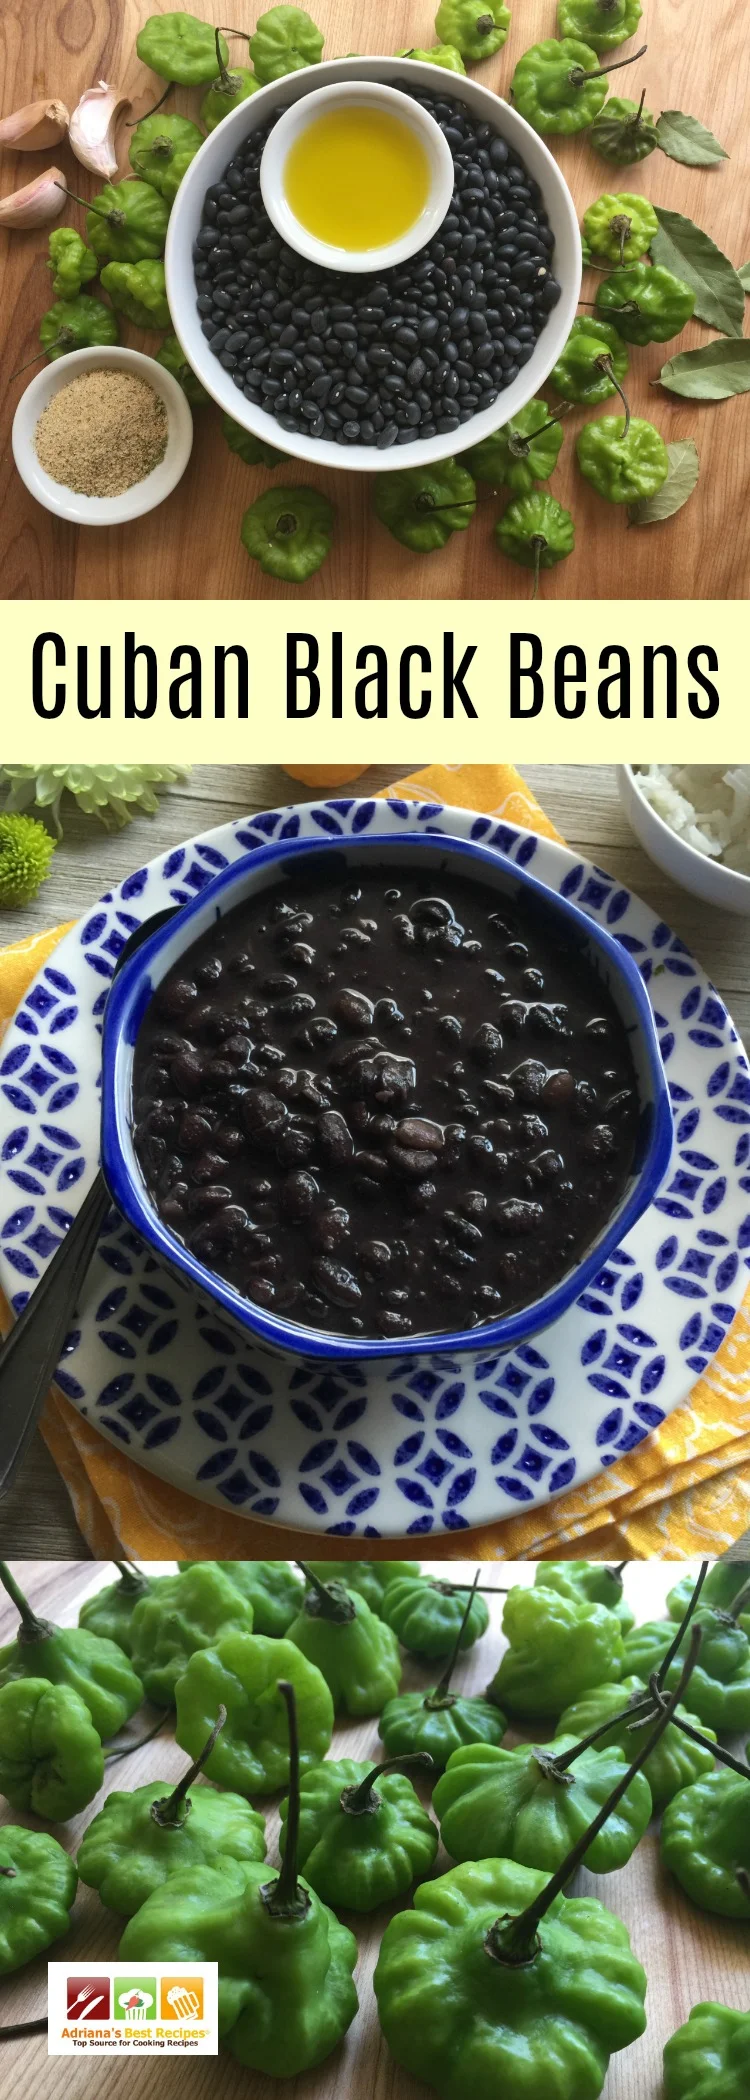 Cuban black beans, a classic family recipe made with dried black beans